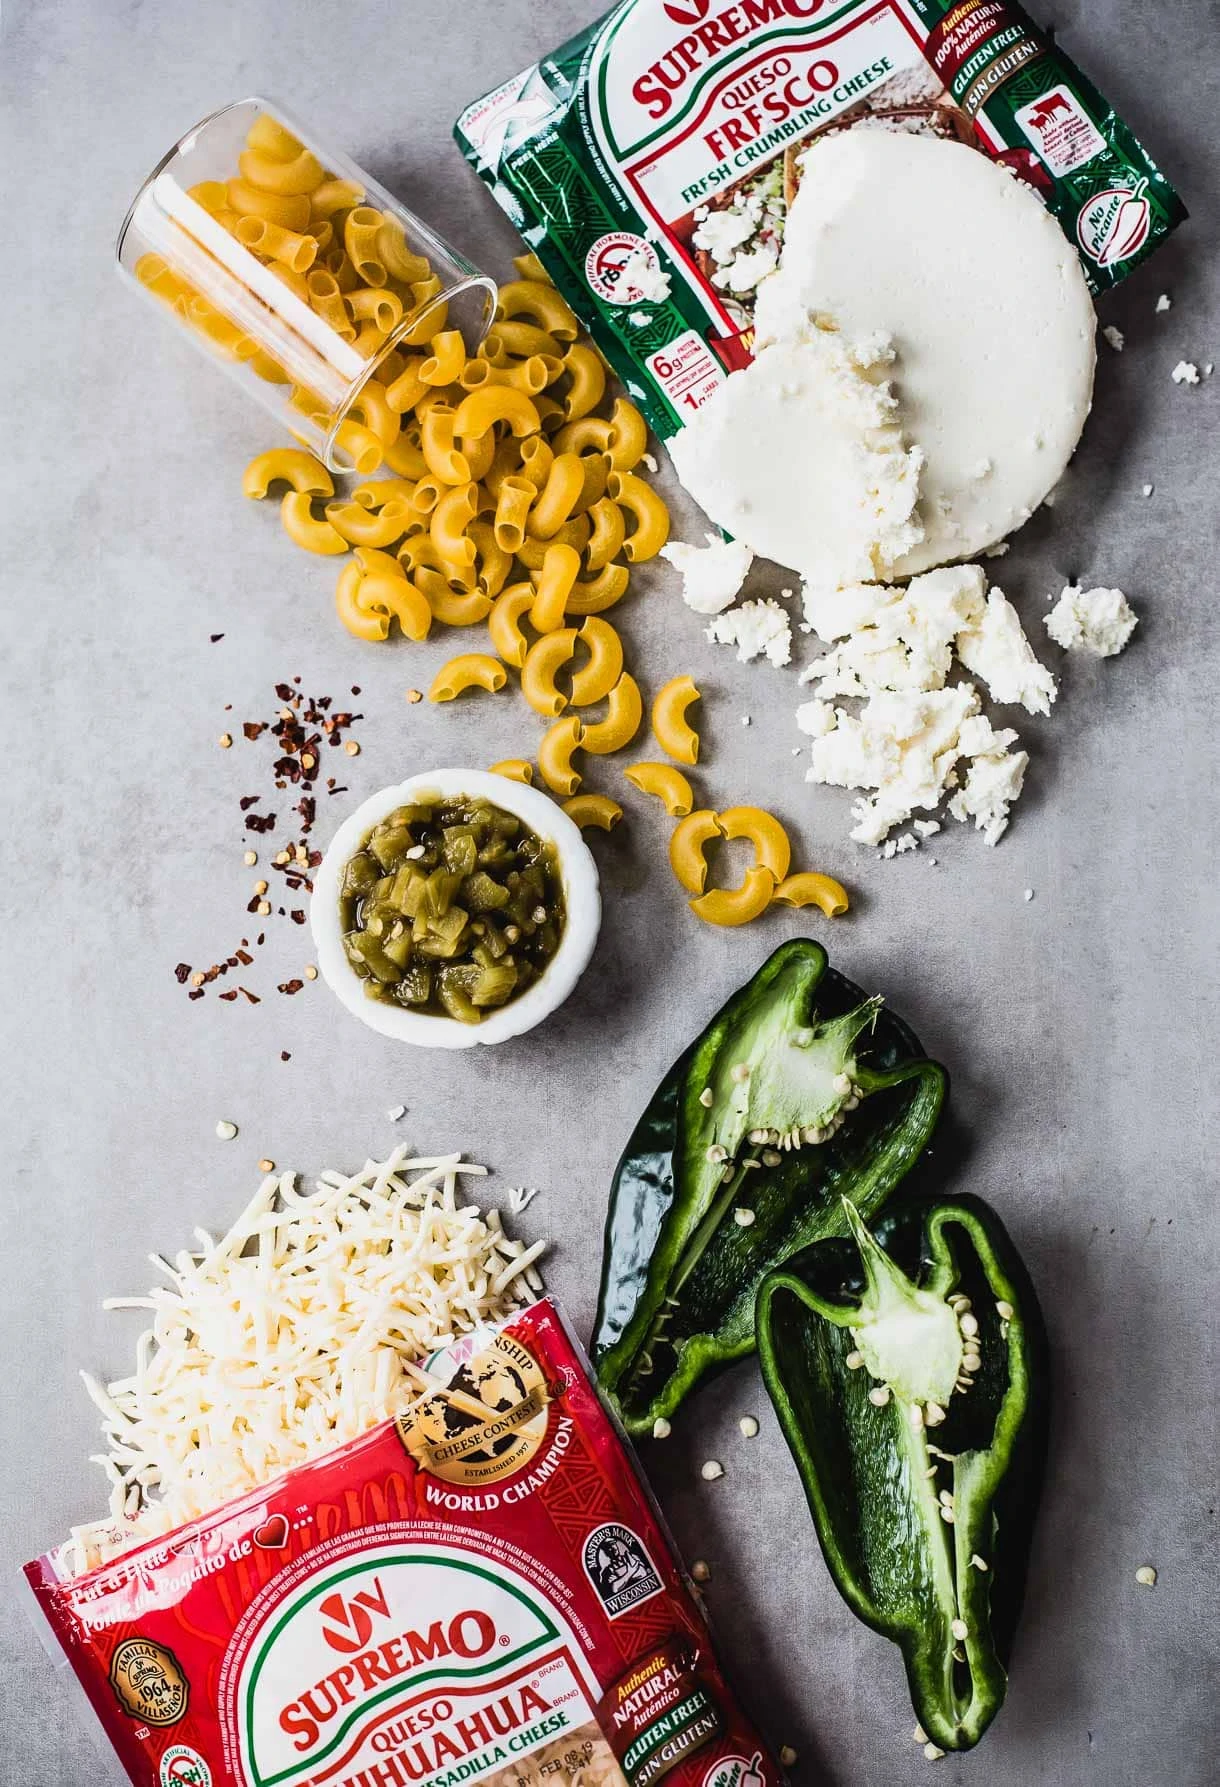 Chile Mac and Cheese ingredients, #polanopeppers #quesofresco